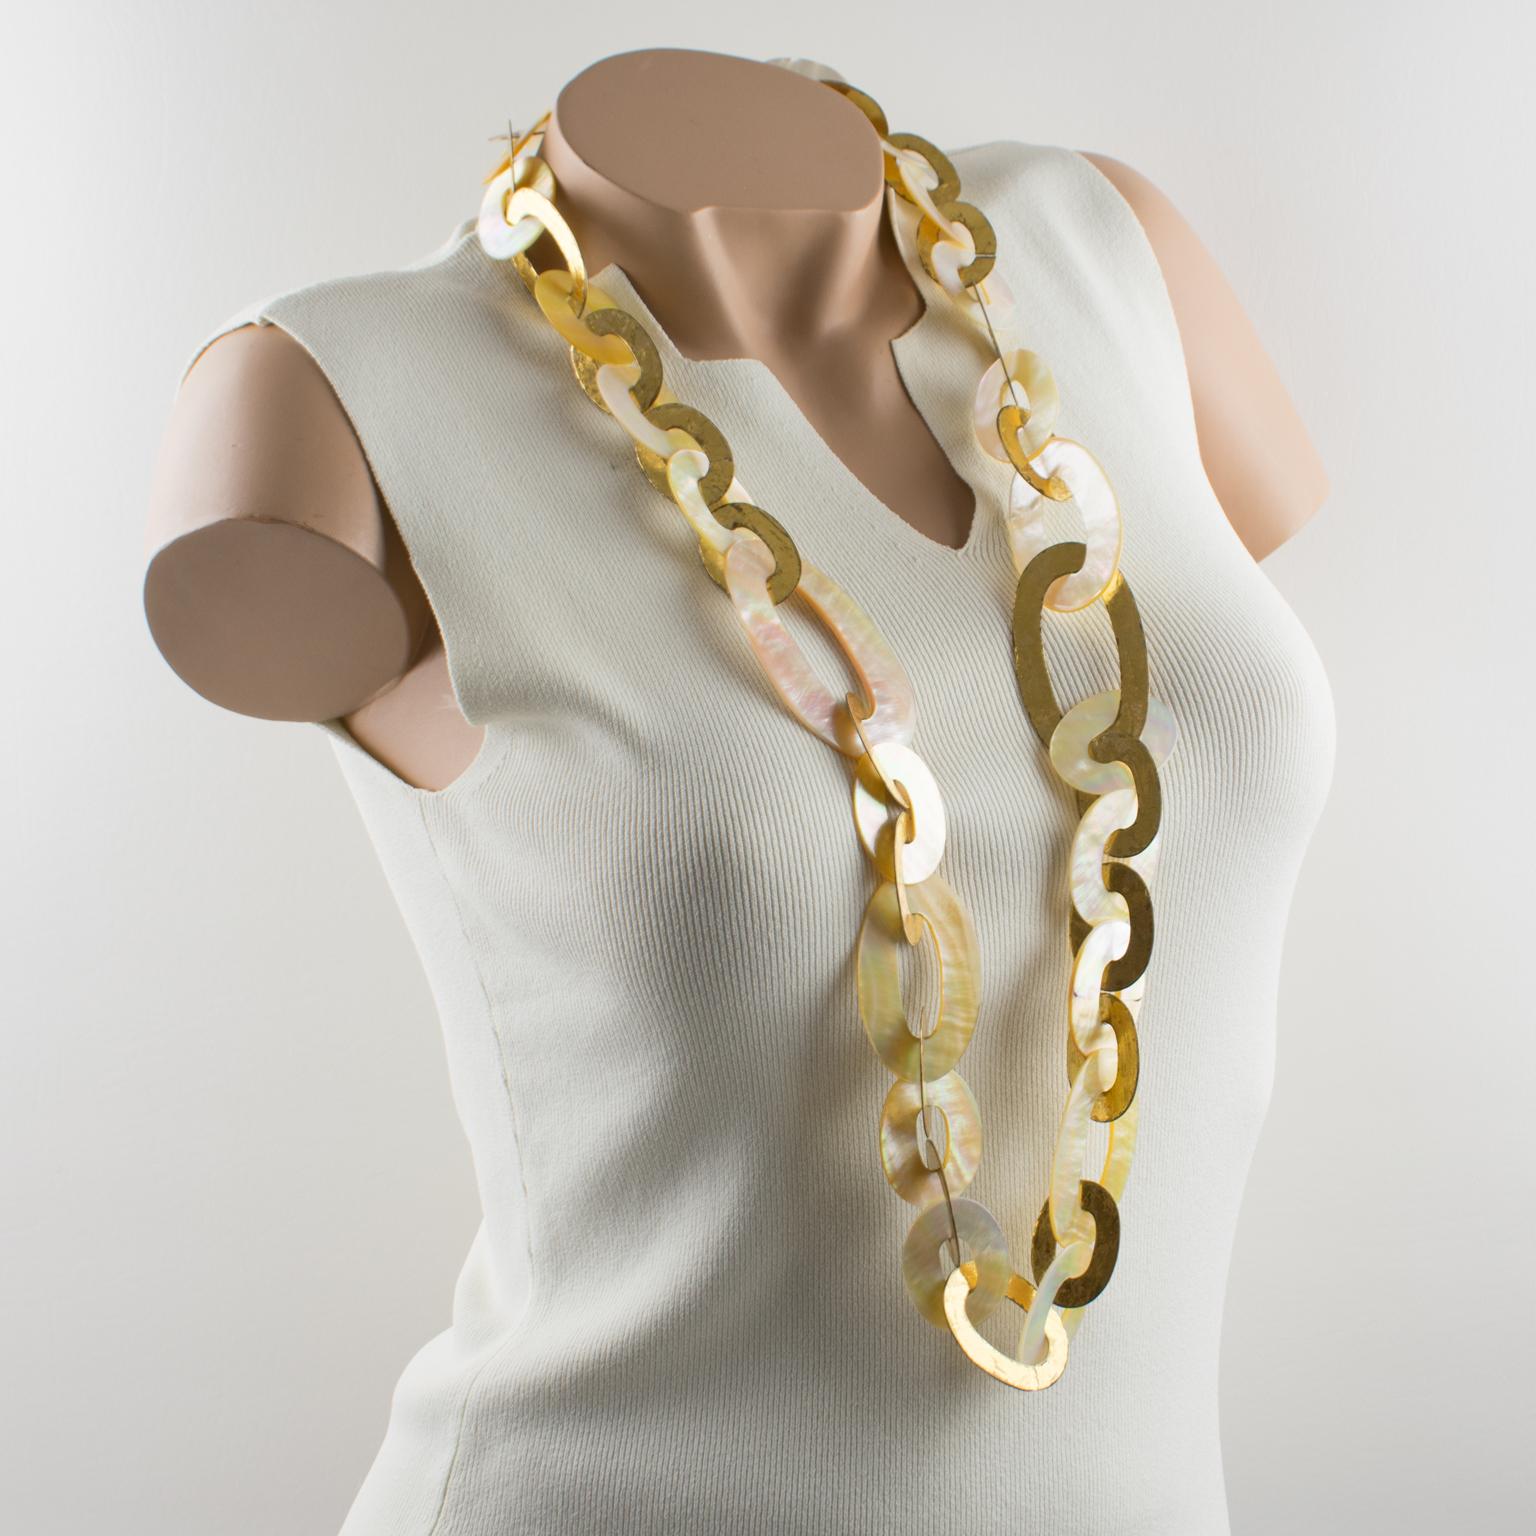 This sophisticated extra-long necklace by Gerda Lyngaard for Monies features a dimensional shape with geometric oval flat link elements in gold foil-coated metal contrasted with natural seashell link elements forming an elegant long-worked chain.